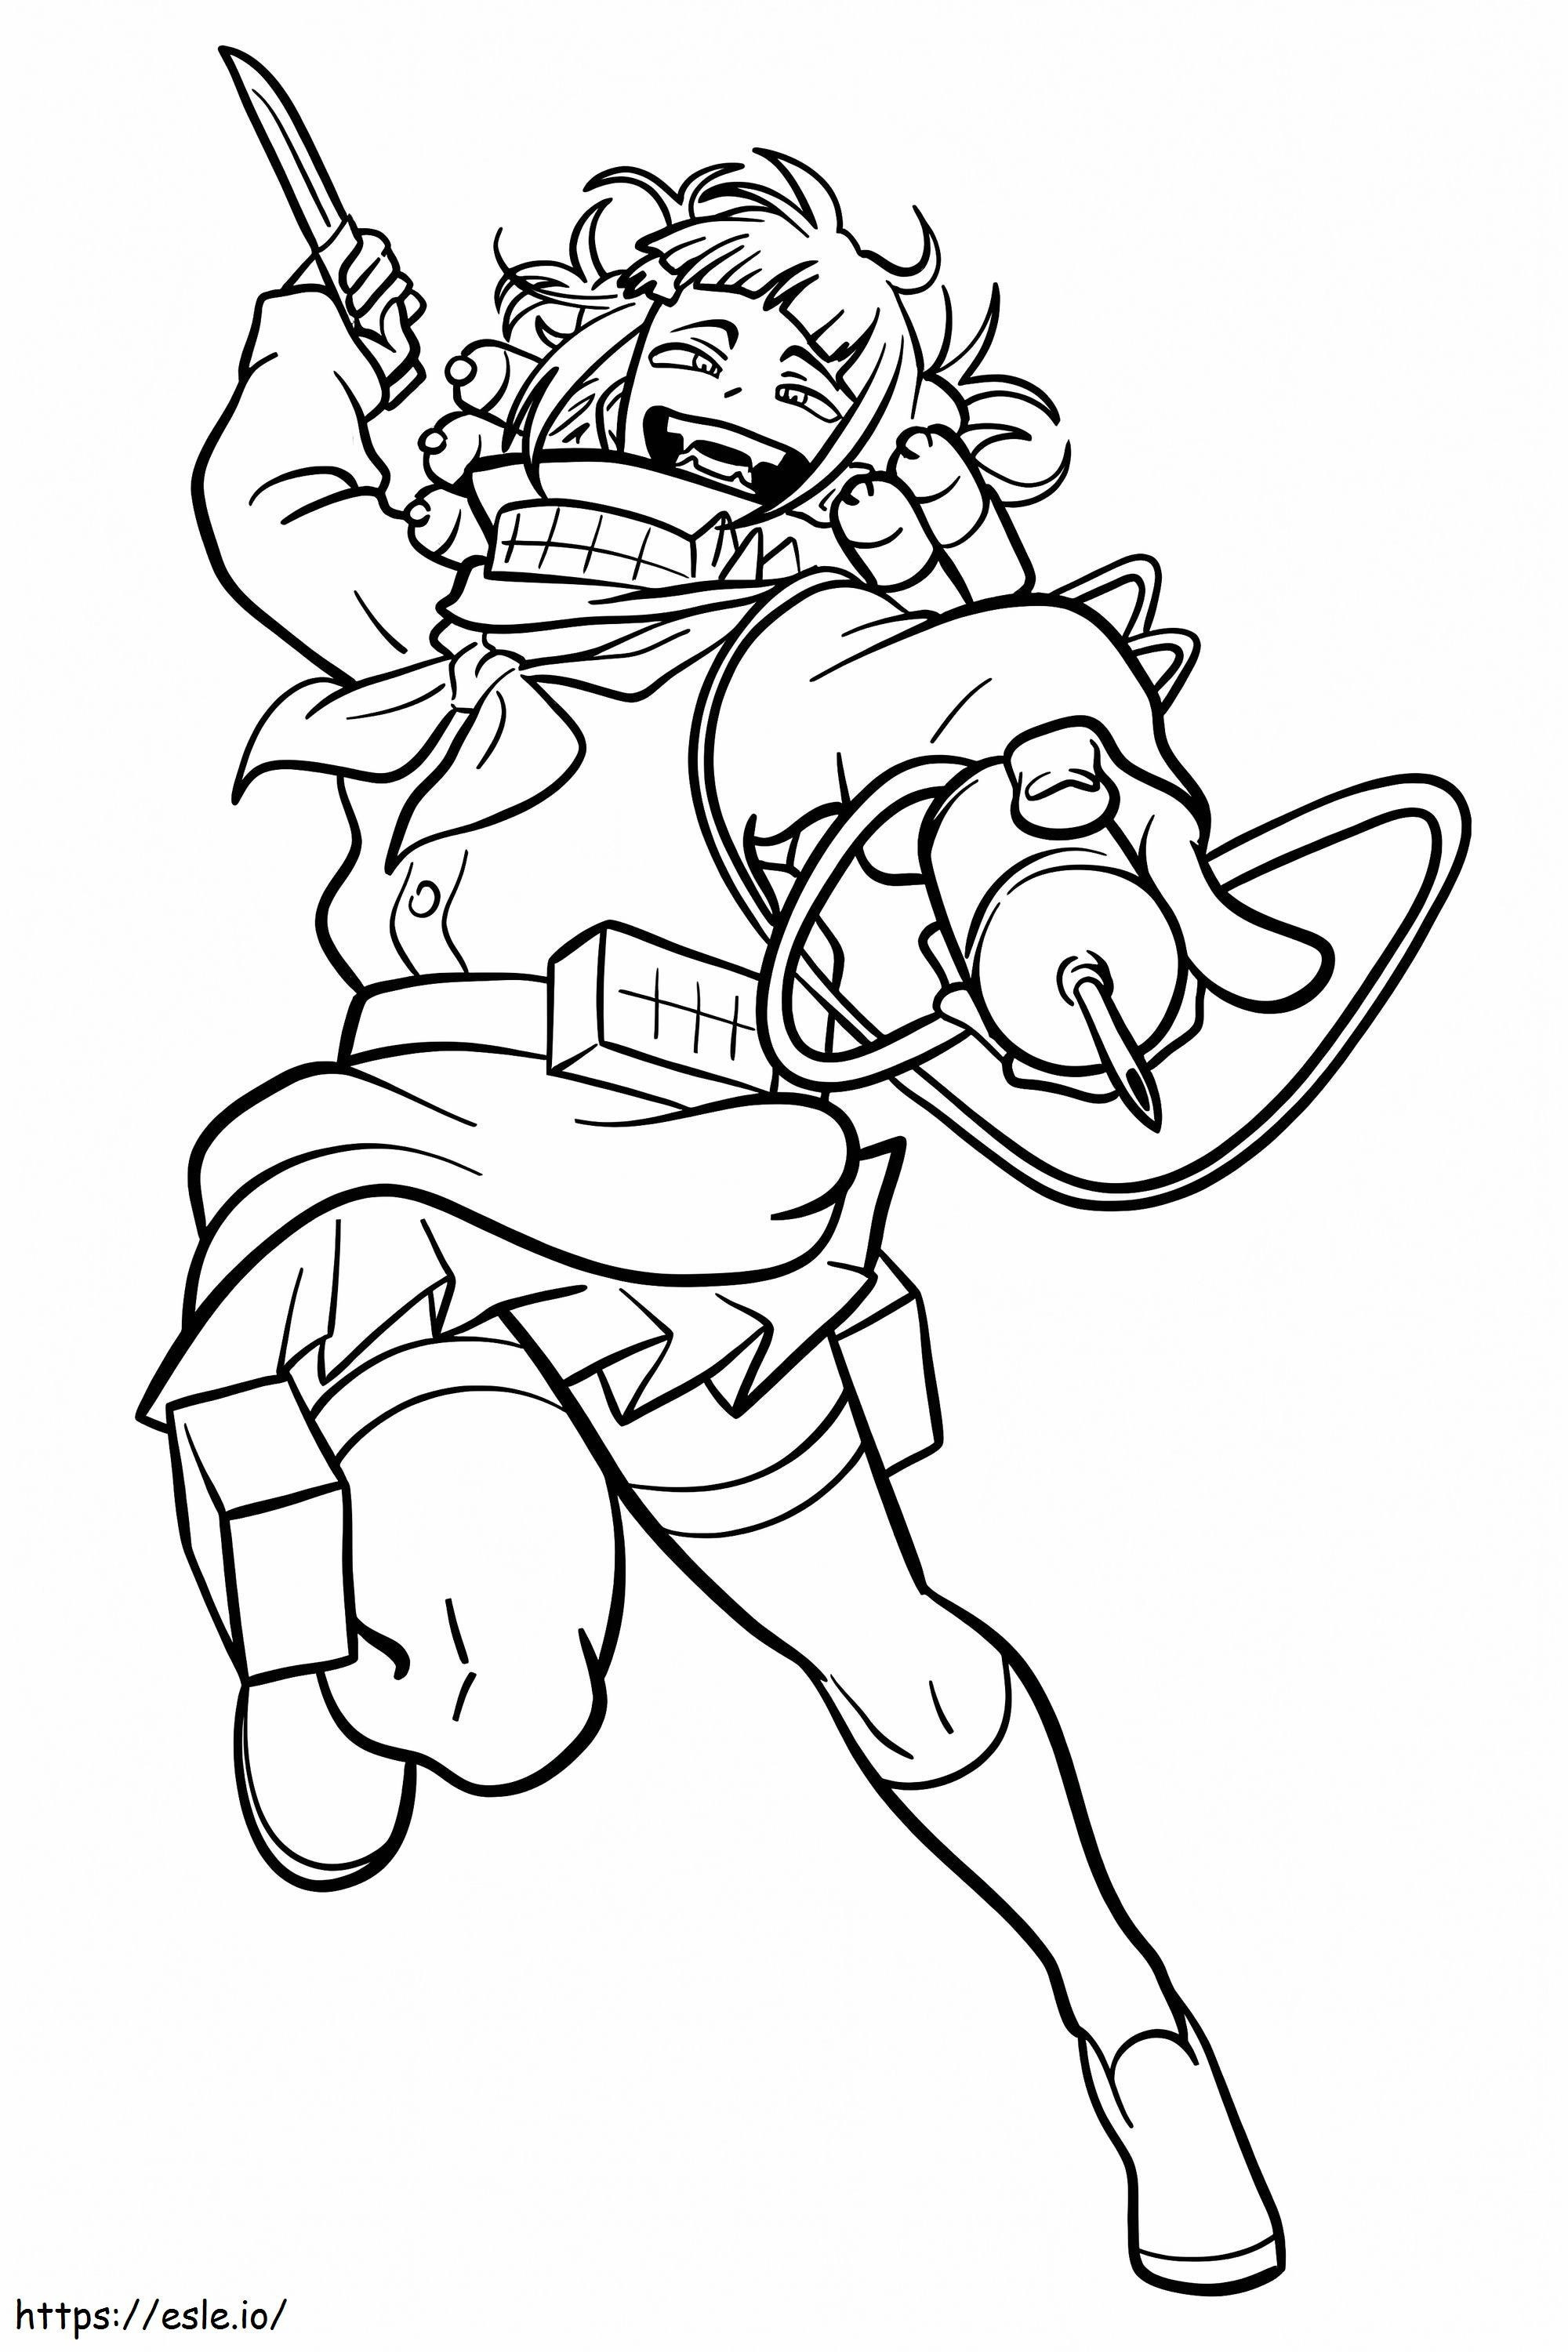 Toga Himiko 3 coloring page